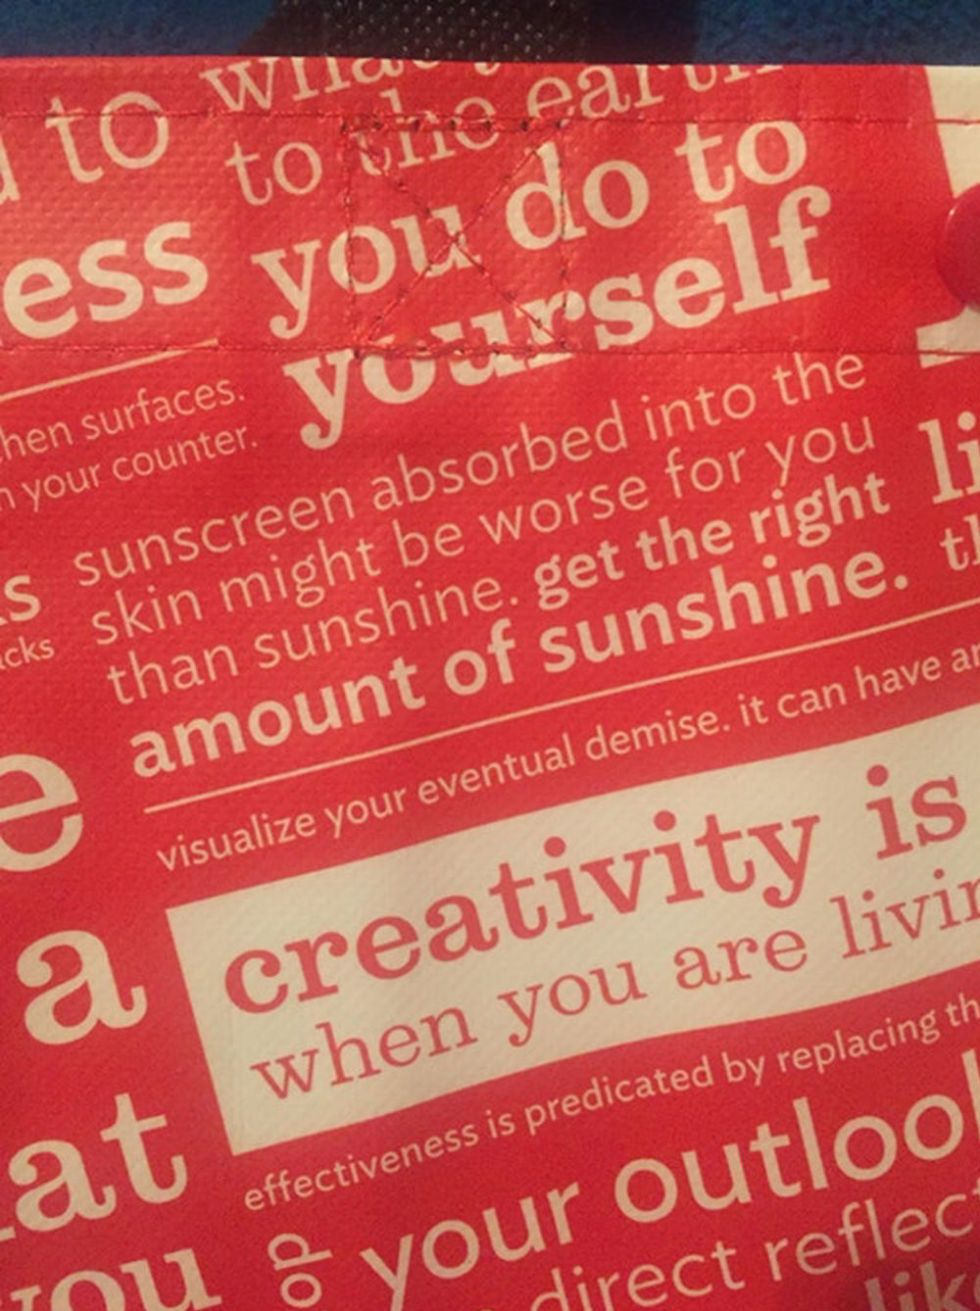 lululemon tote bag controversy